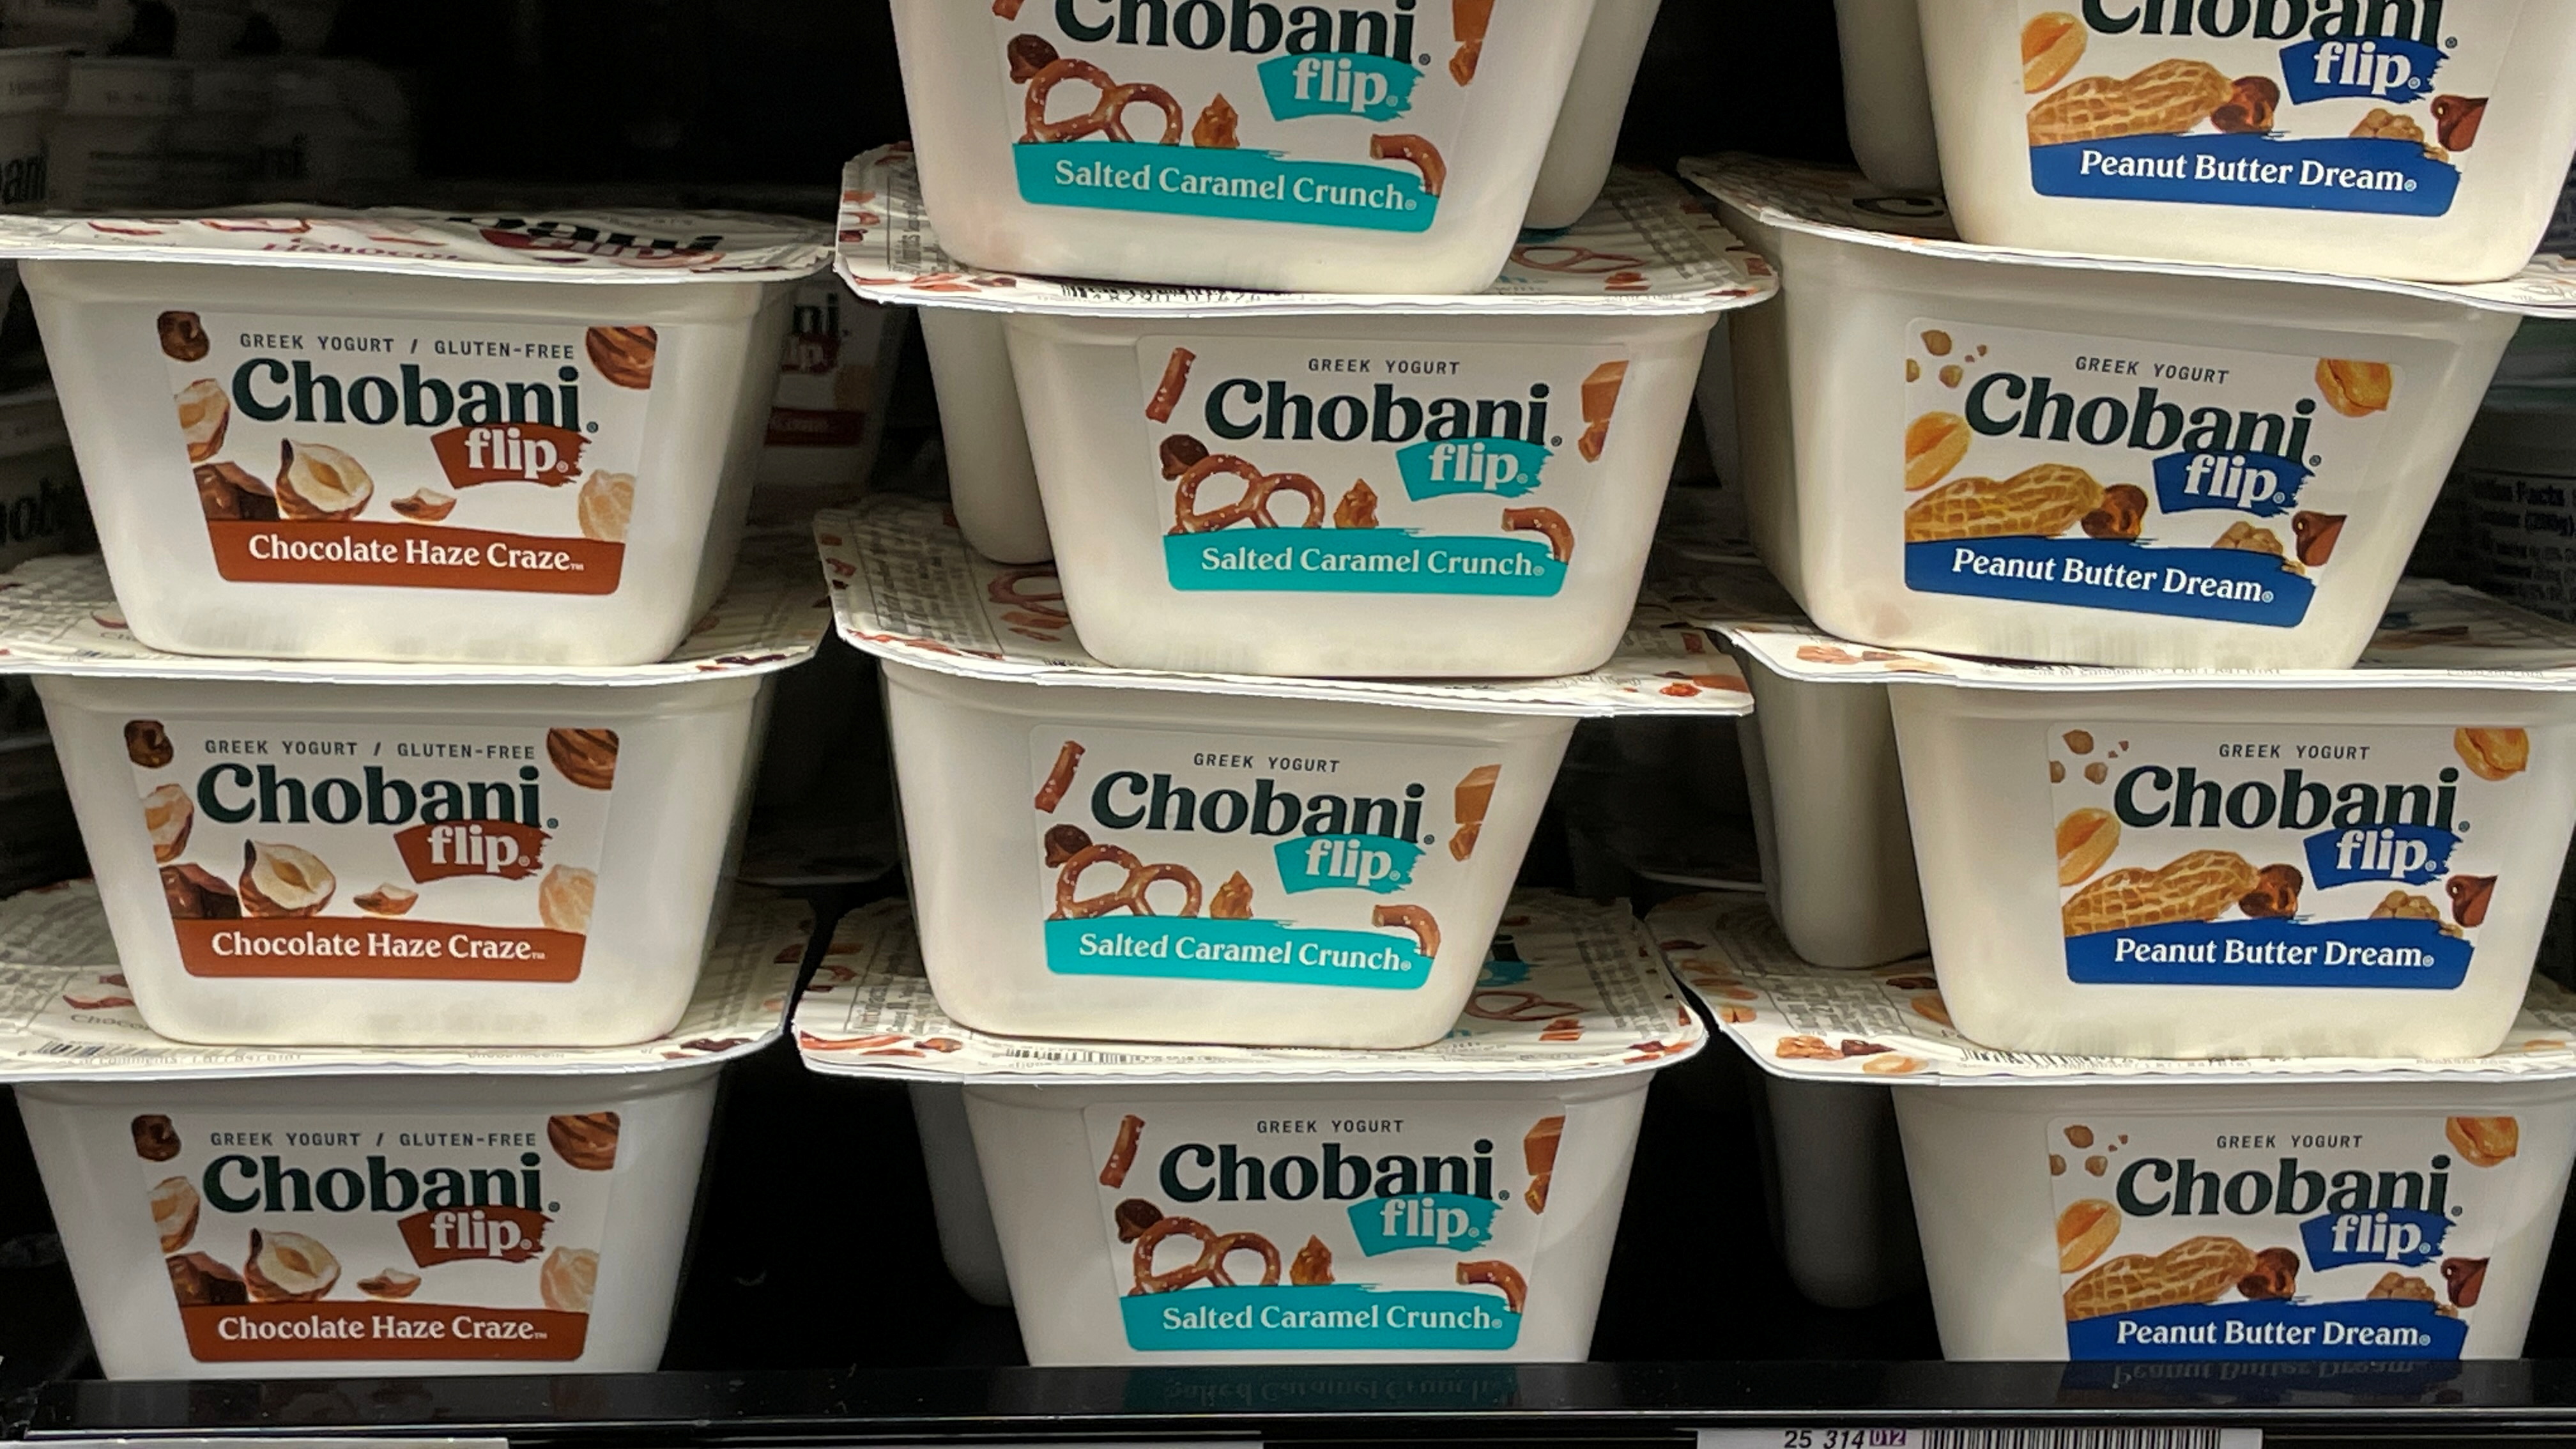 Greek-yogurt maker Chobani is shown for sale in a grocery store in San Diego, California. Greek-yogurt maker Chobani could be valued at more than $10 billion in its initial public offering (IPO), a person familiar with the matter told Reuters on Wednesday, as the company confidentially filed regulatory paperwork for its stock market listing. July 07, 2021.  REUTERS/Mike Blake